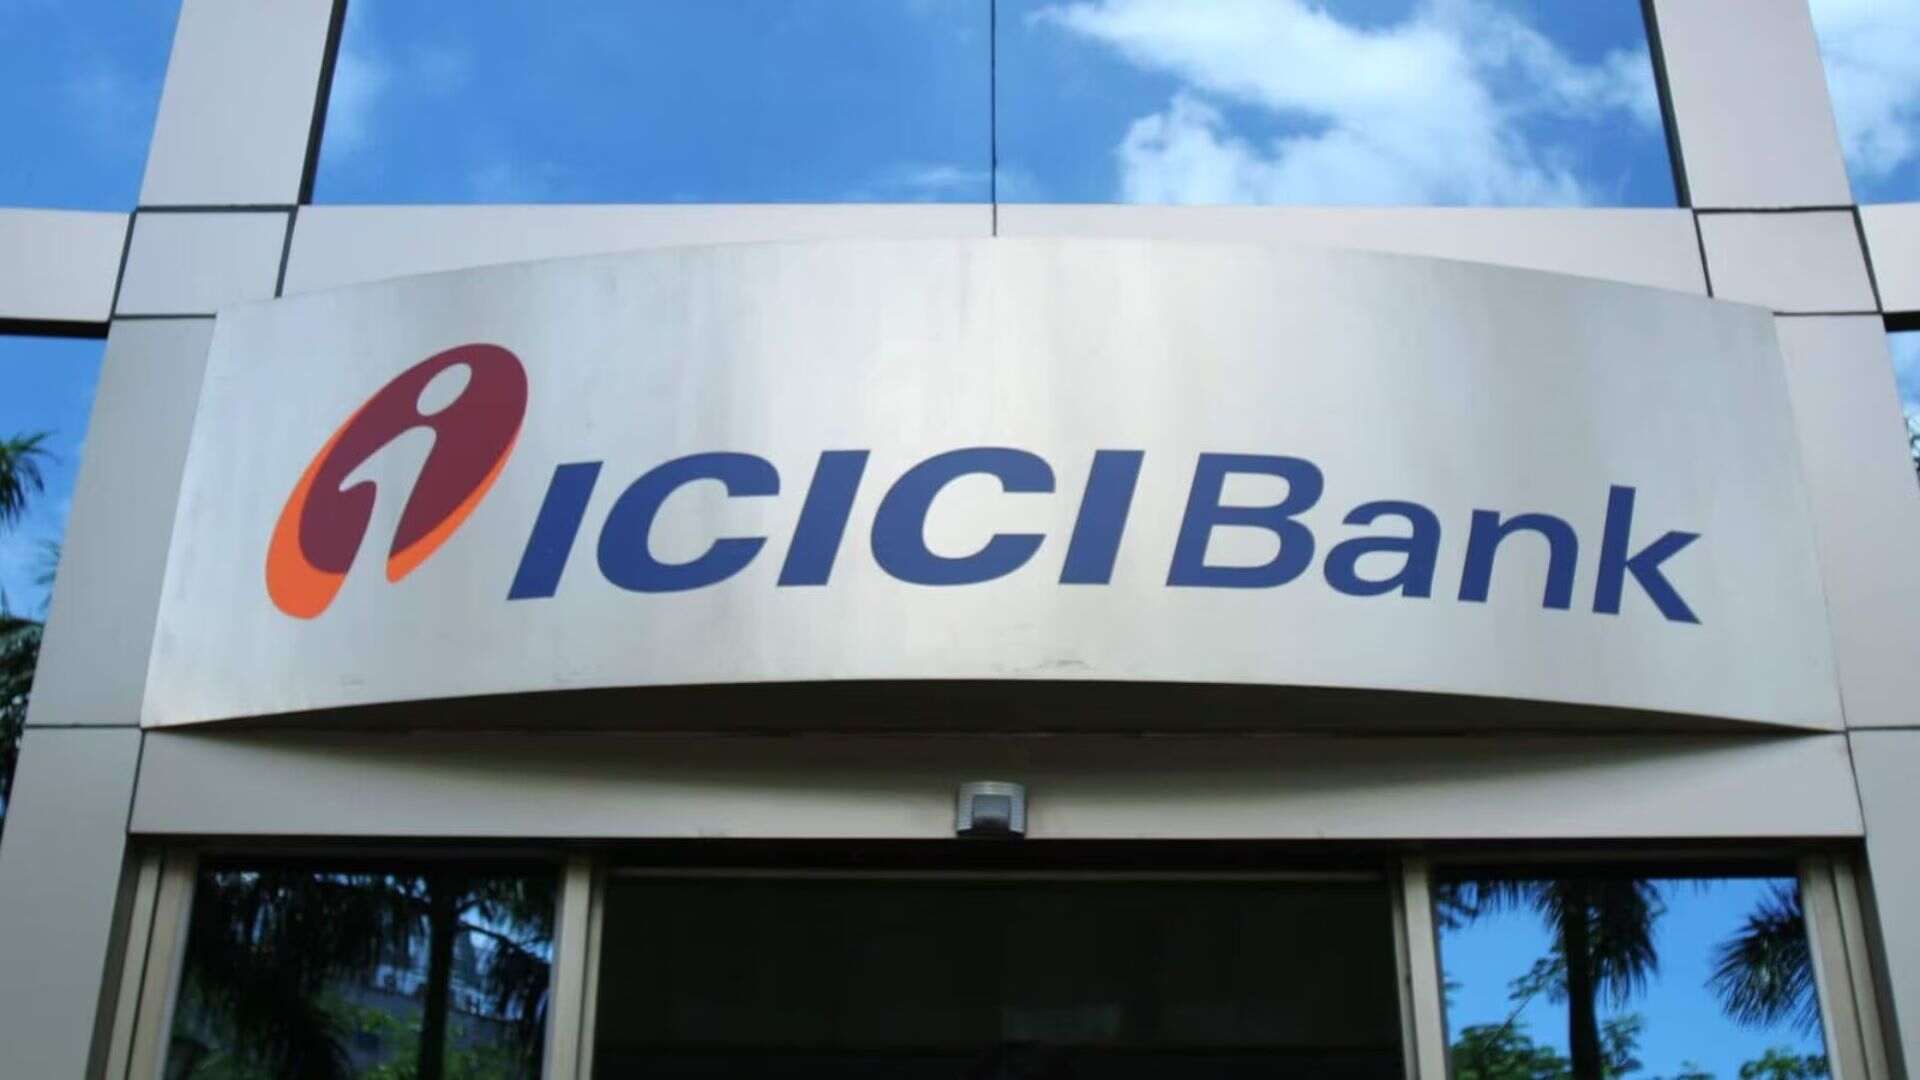 ICICI Bank Issues Warning On ‘Customer Service Frauds’: Tips To Spot Scams